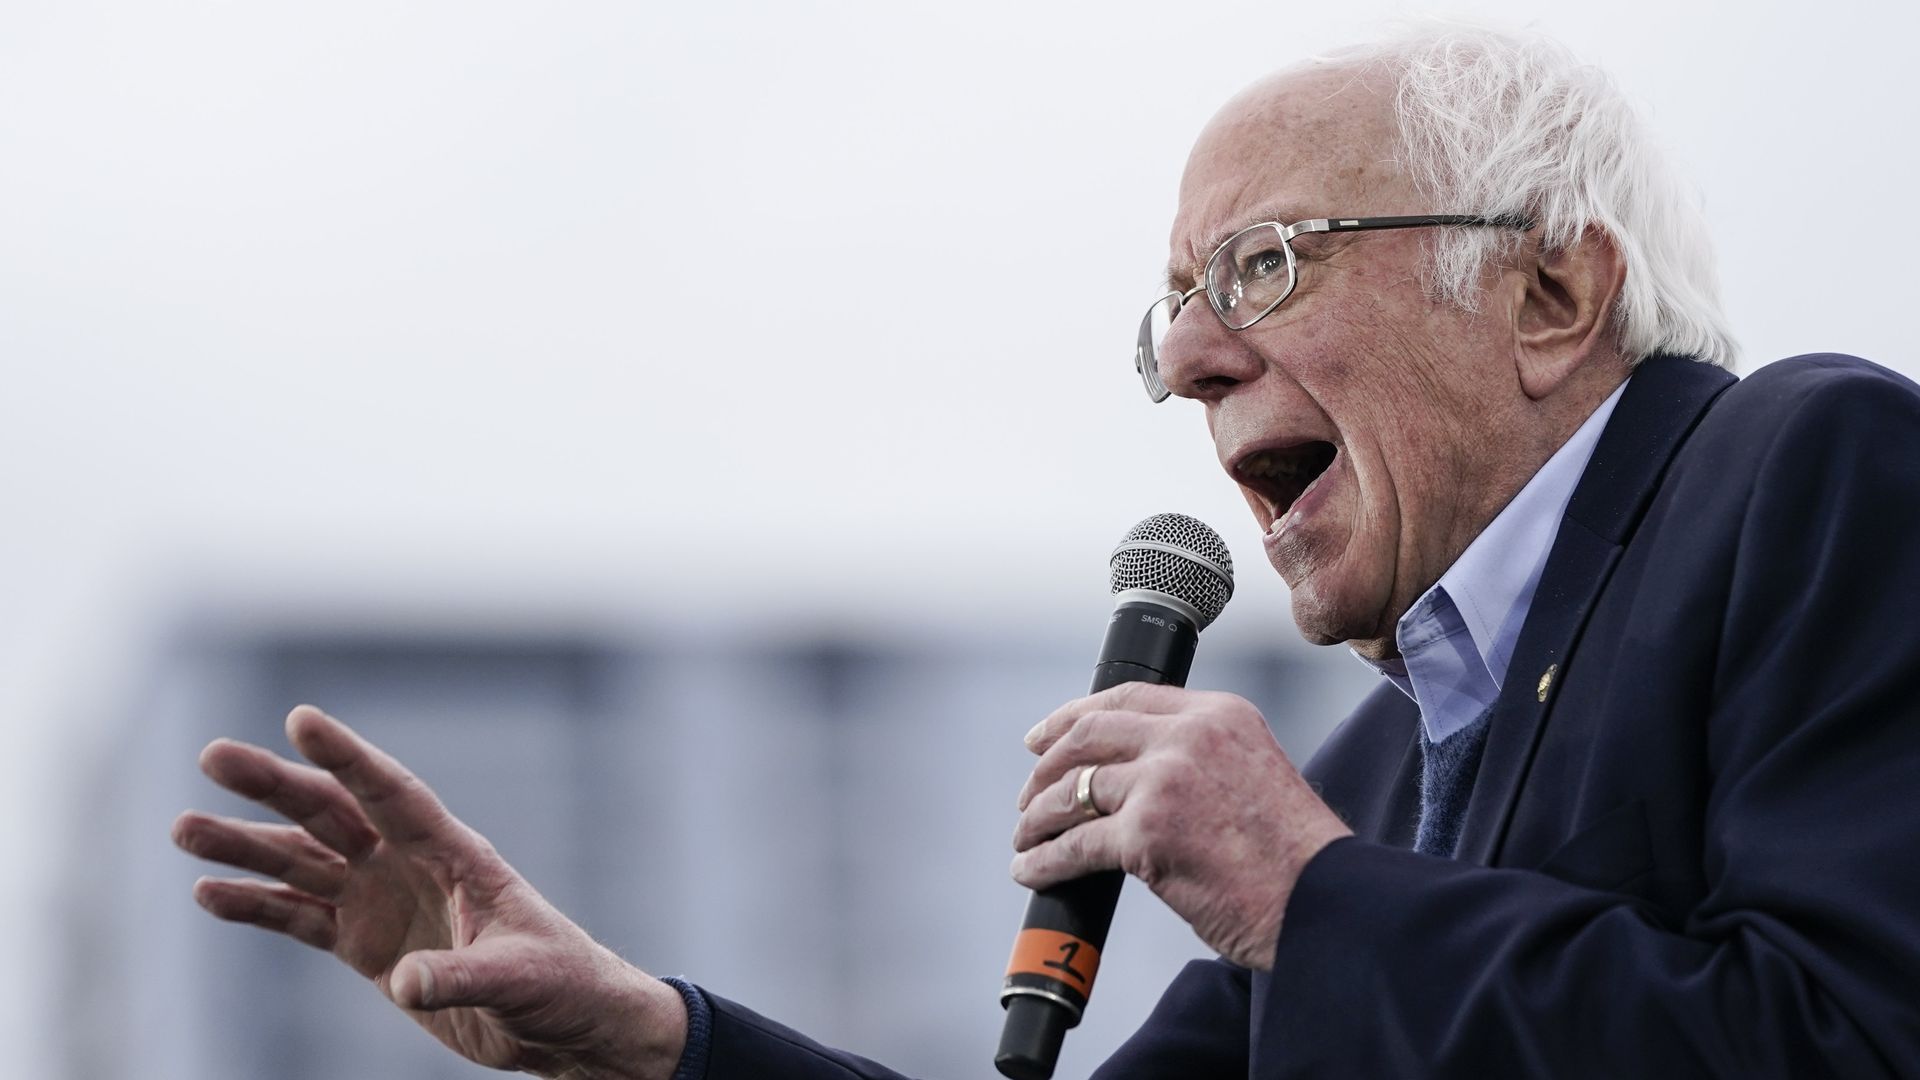  Democratic presidential candidate Sen. Bernie Sanders (I-VT) speaks during a campaign rally at Vic Mathias Shores Park on February 23, 2020 in Austin, Texas. 